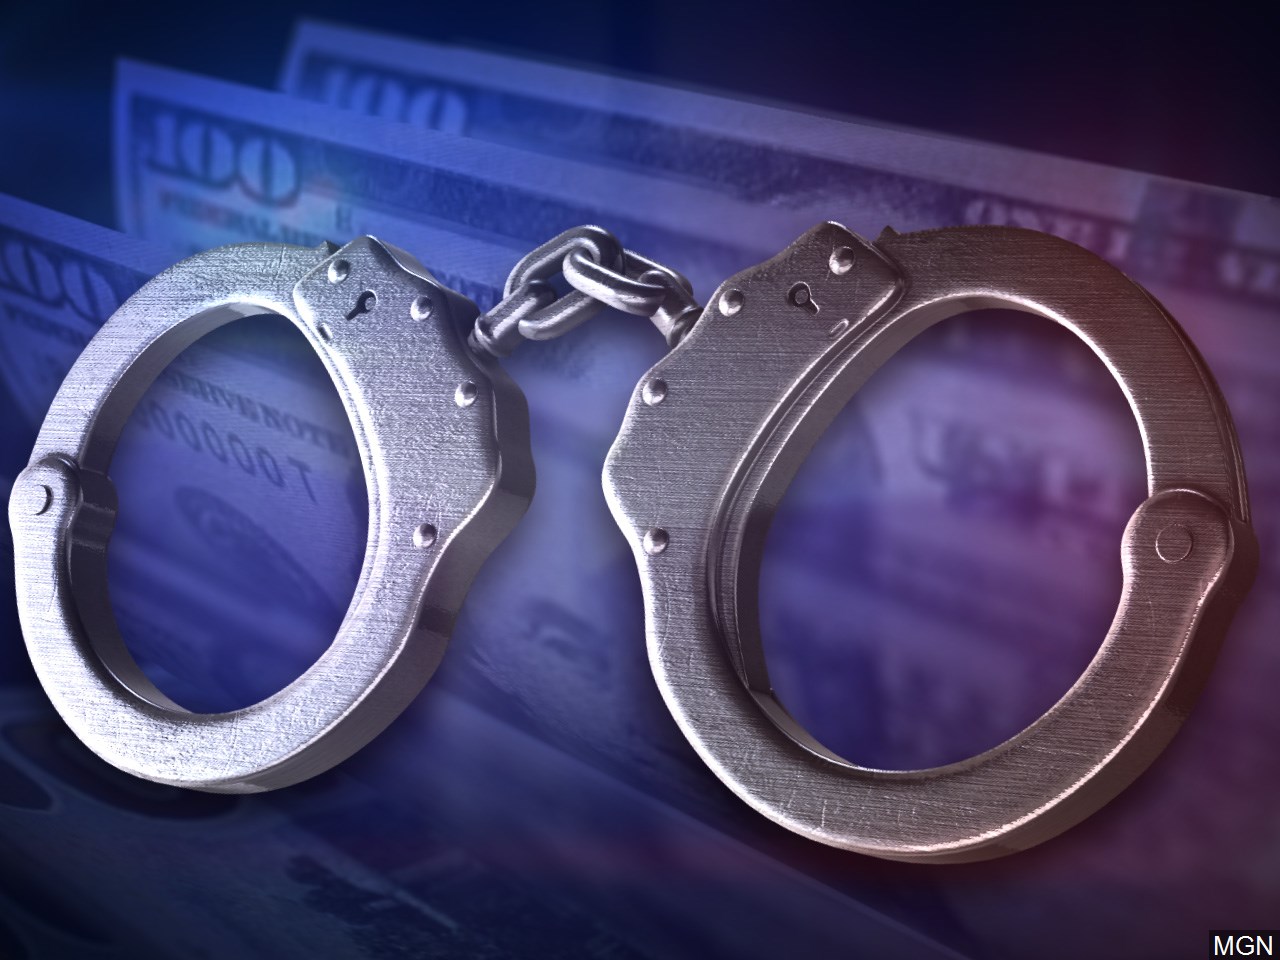 3 women arrested in connection to $9 million theft from assisted living facility resident